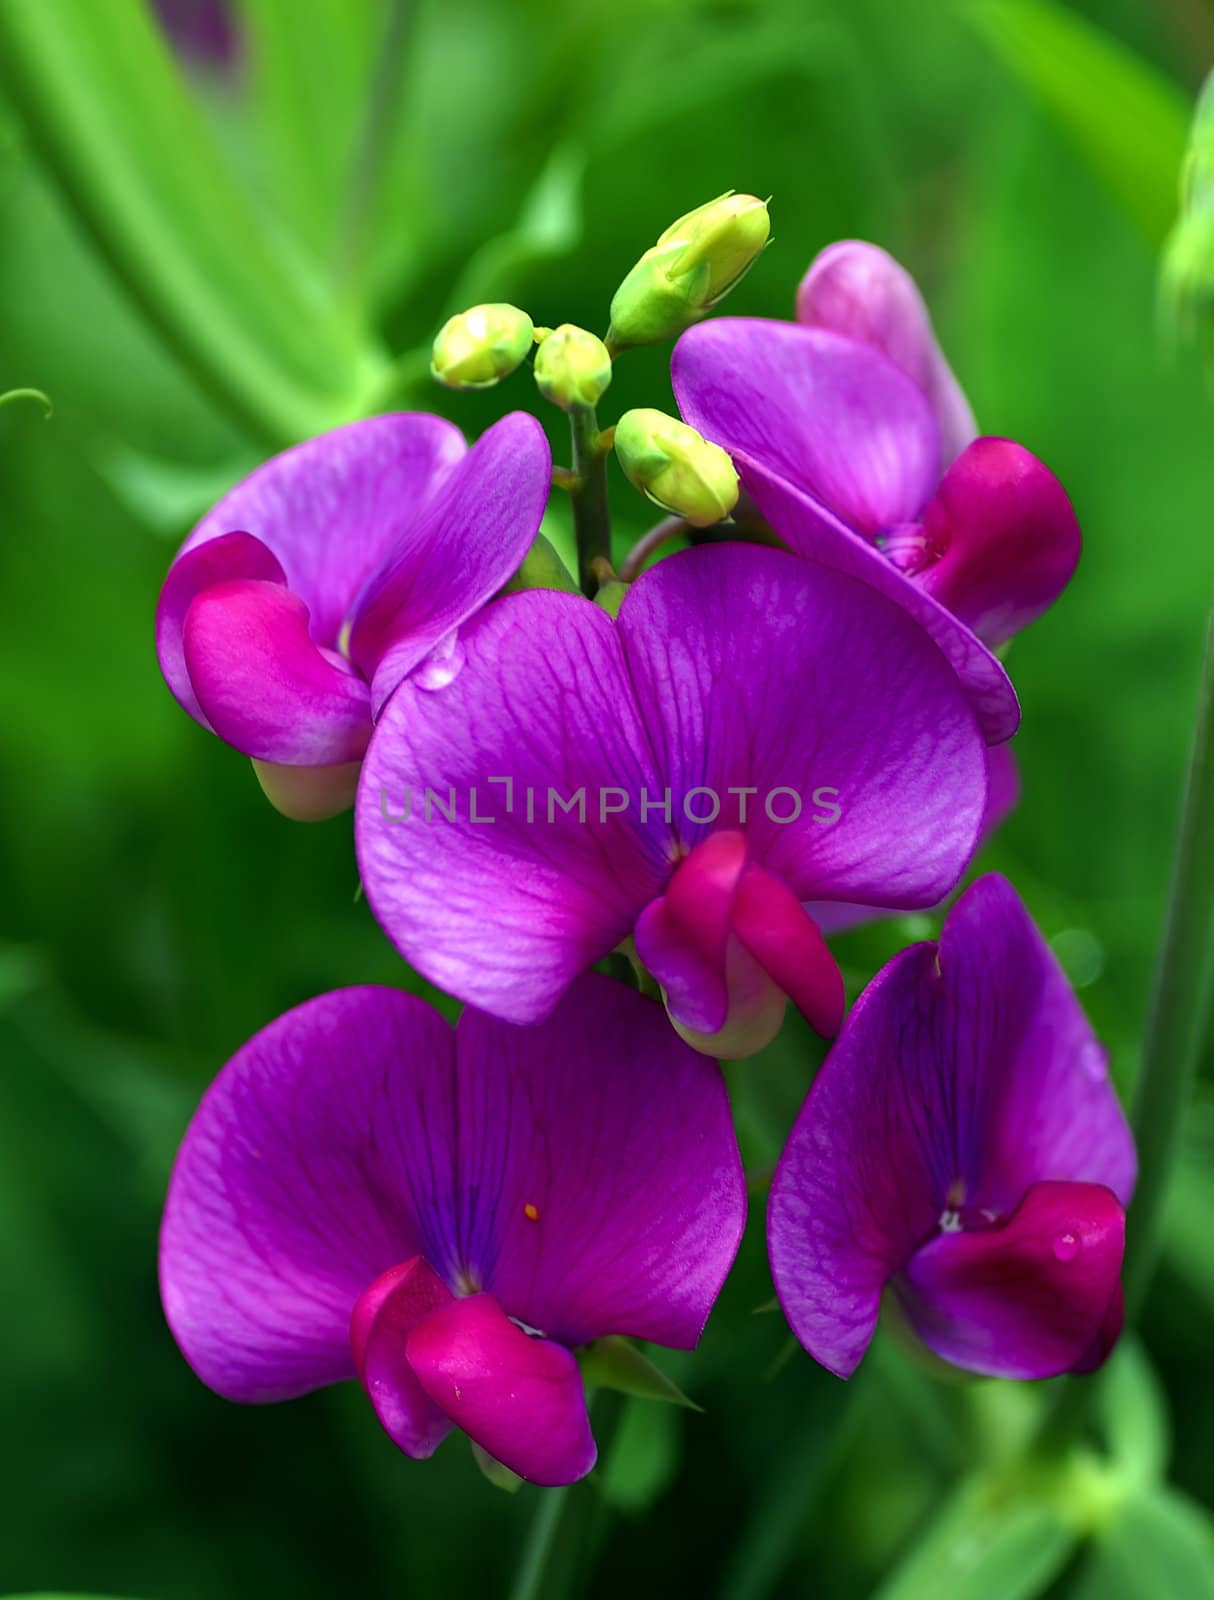 Close up shot of pink sweet pea flower